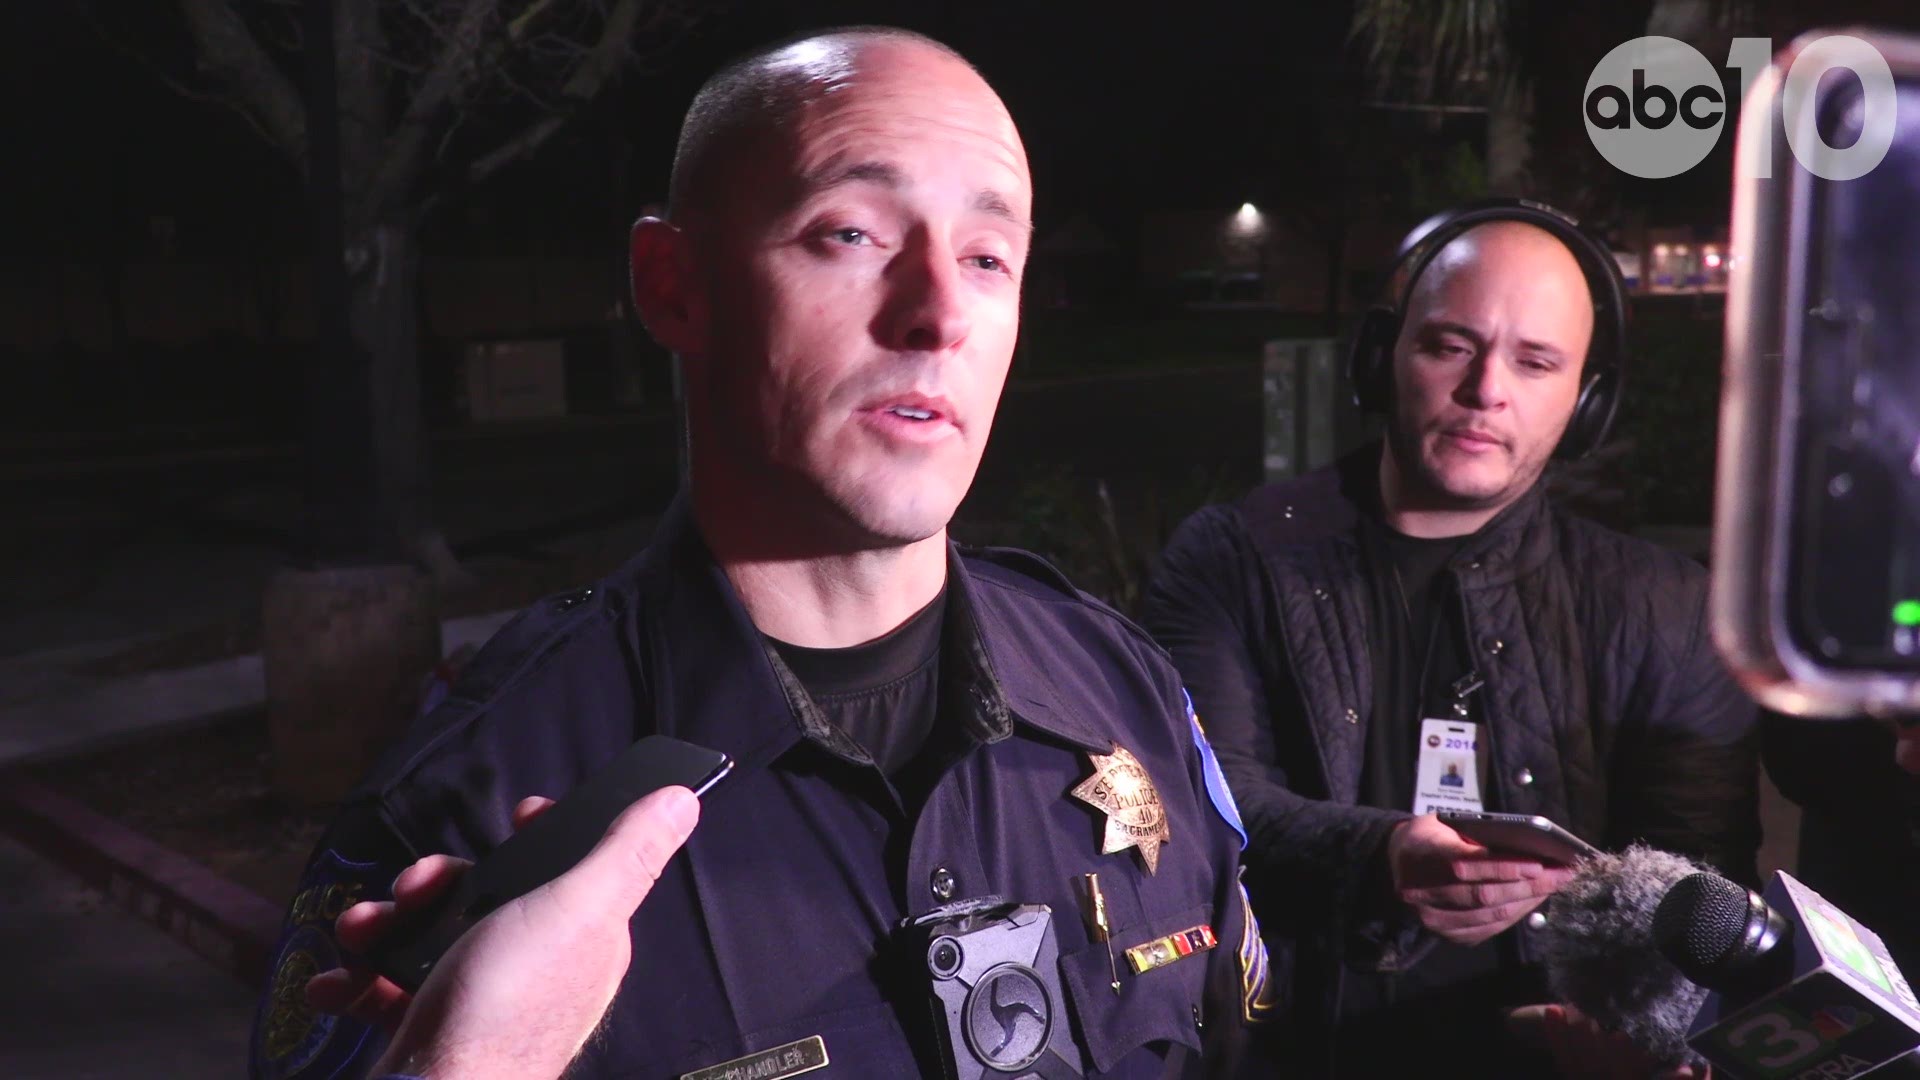 Sacramento Police Sgt. Vance Chandler said the protesters were arrested after officers asked them to disperse several times following reports of cars being keyed.